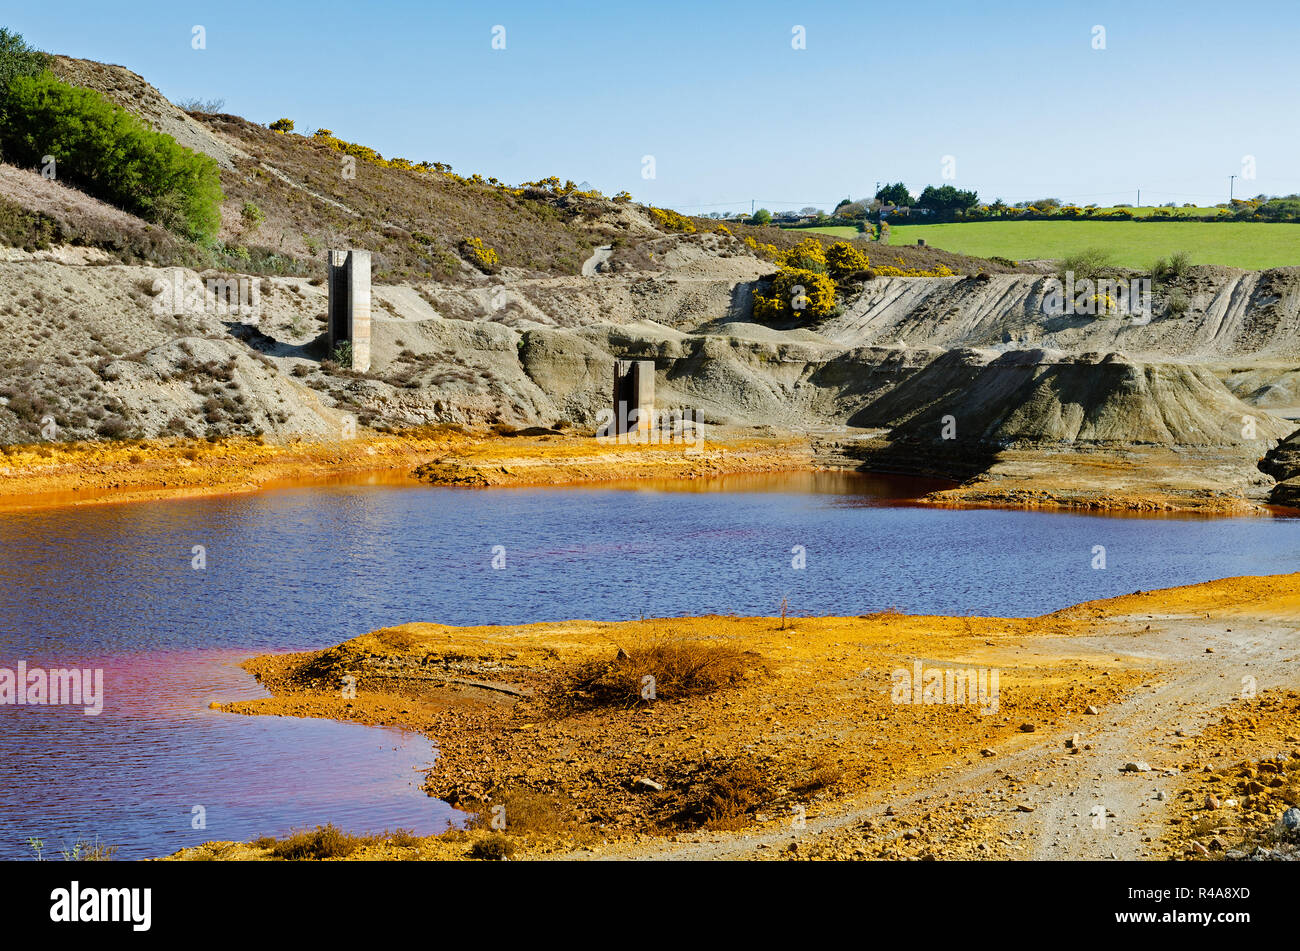 industrial pollution, polluted land and water from old tin mine workings near st.day in cornwall, england, britain, uk. Stock Photo